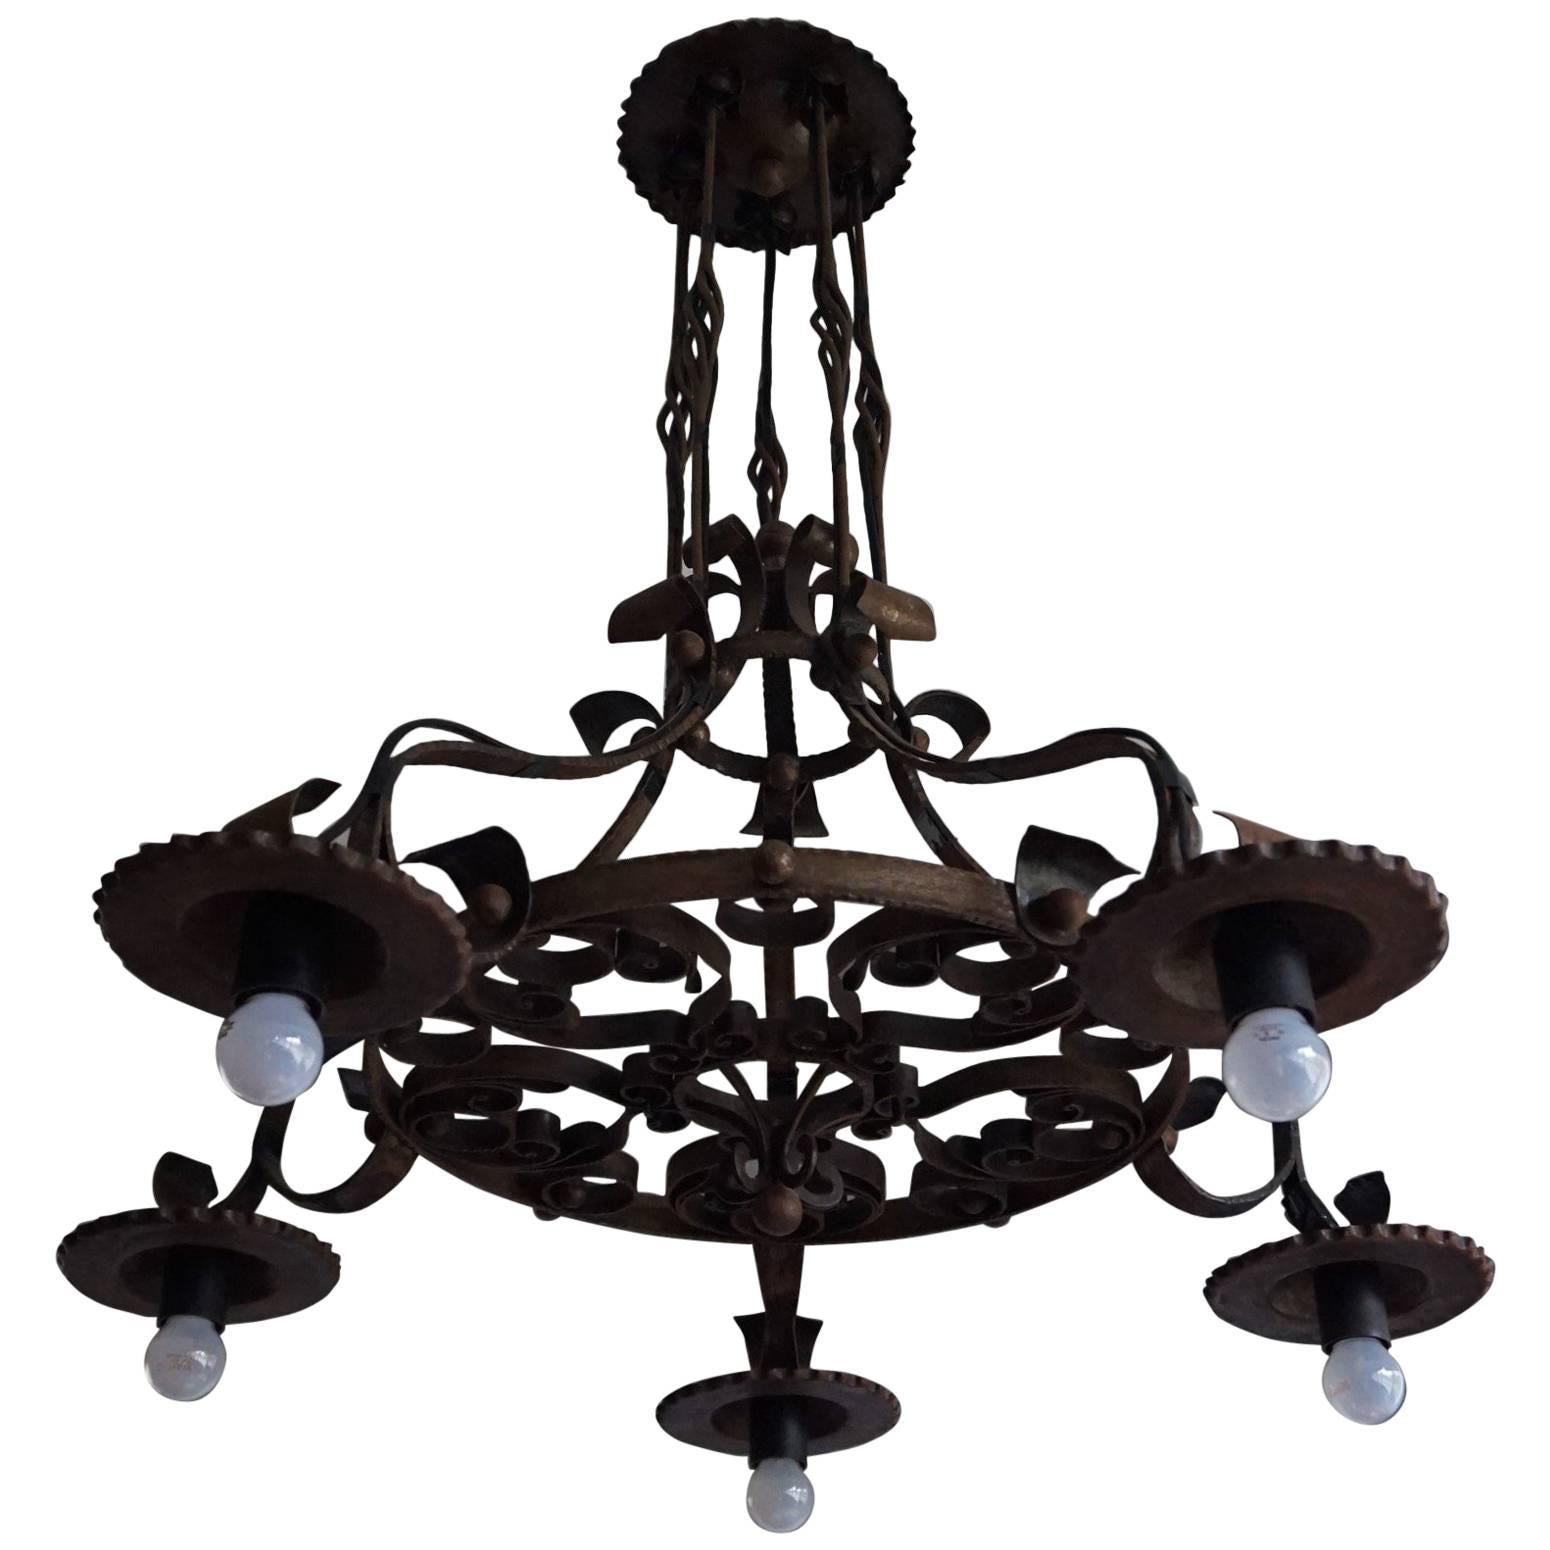 Good Size & Hand-Forged Arts & Crafts Wrought Iron Light Fixture or Chandelier